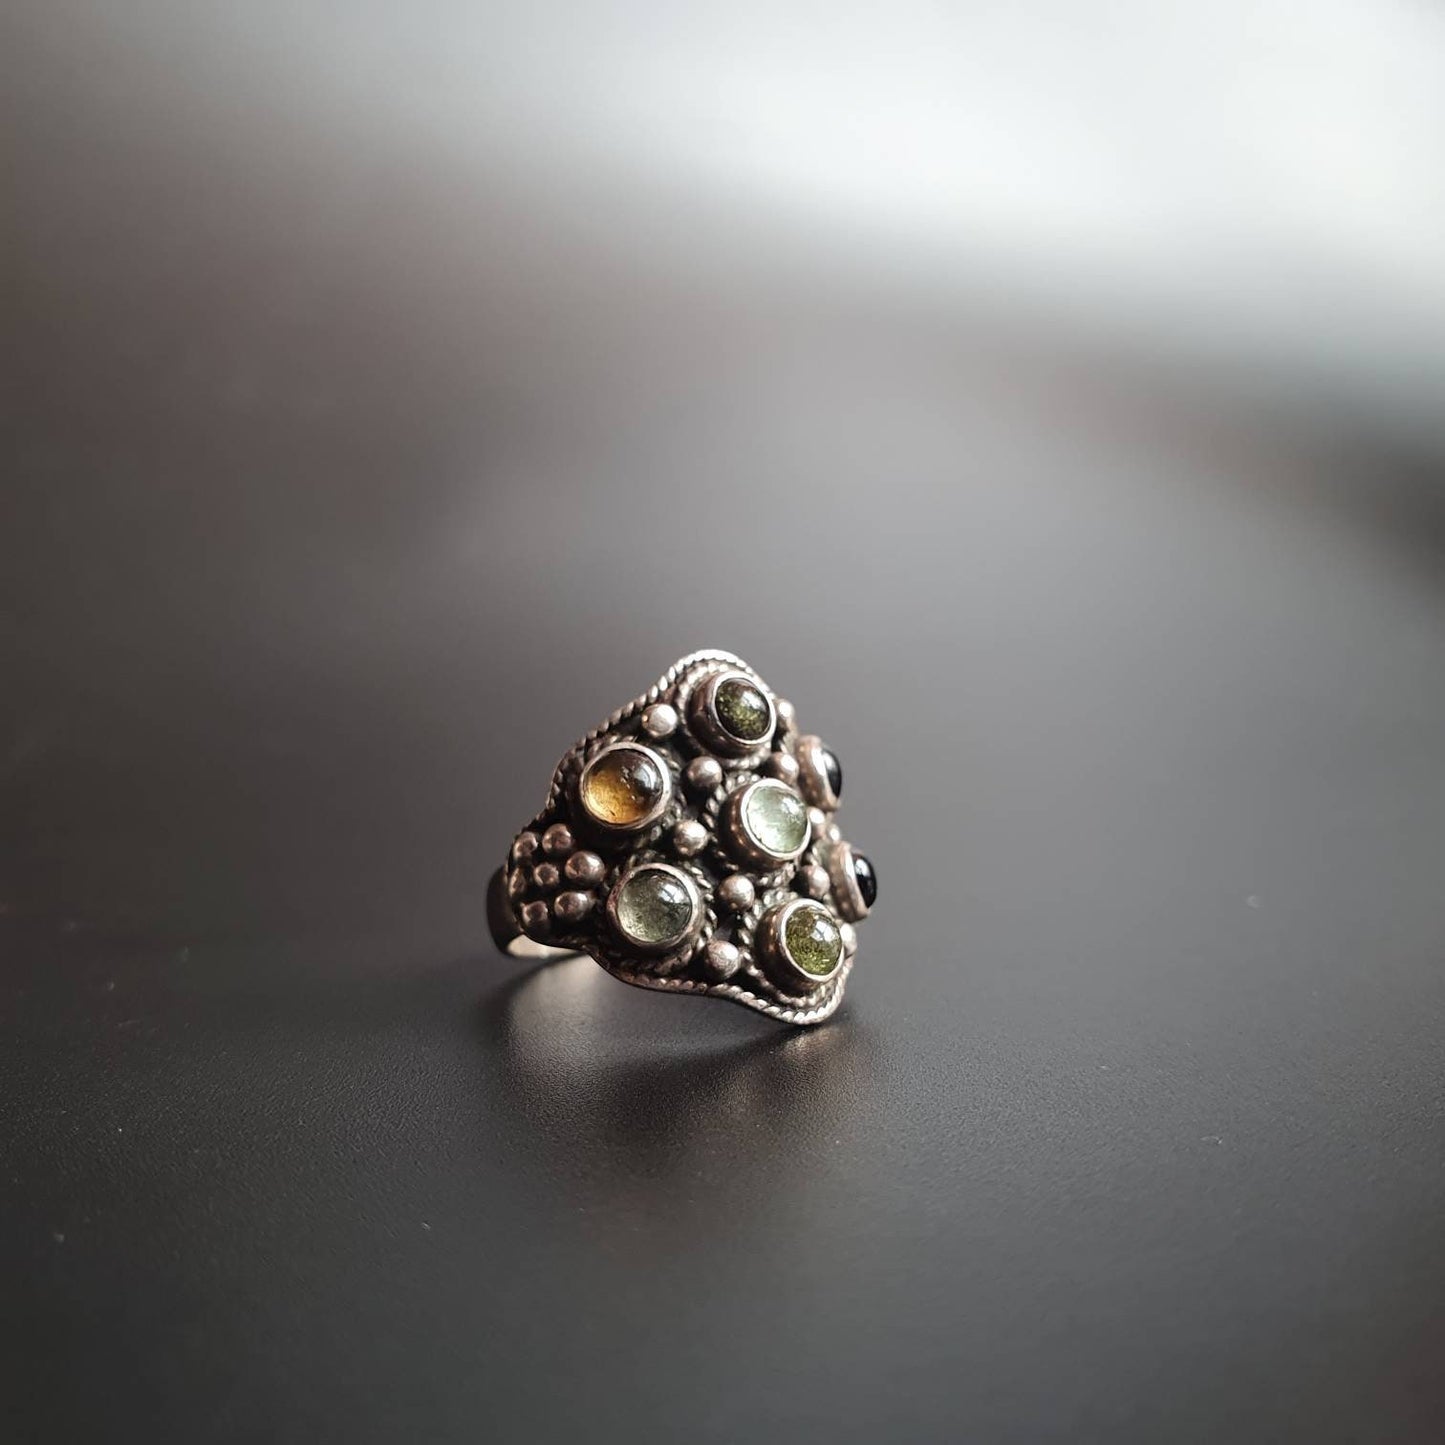 Multi stone ring, sterling silver ring, statement ring, vintage ring, handmade ring,silver,ring, Jewelry, witchy, gothic,gift, nature,